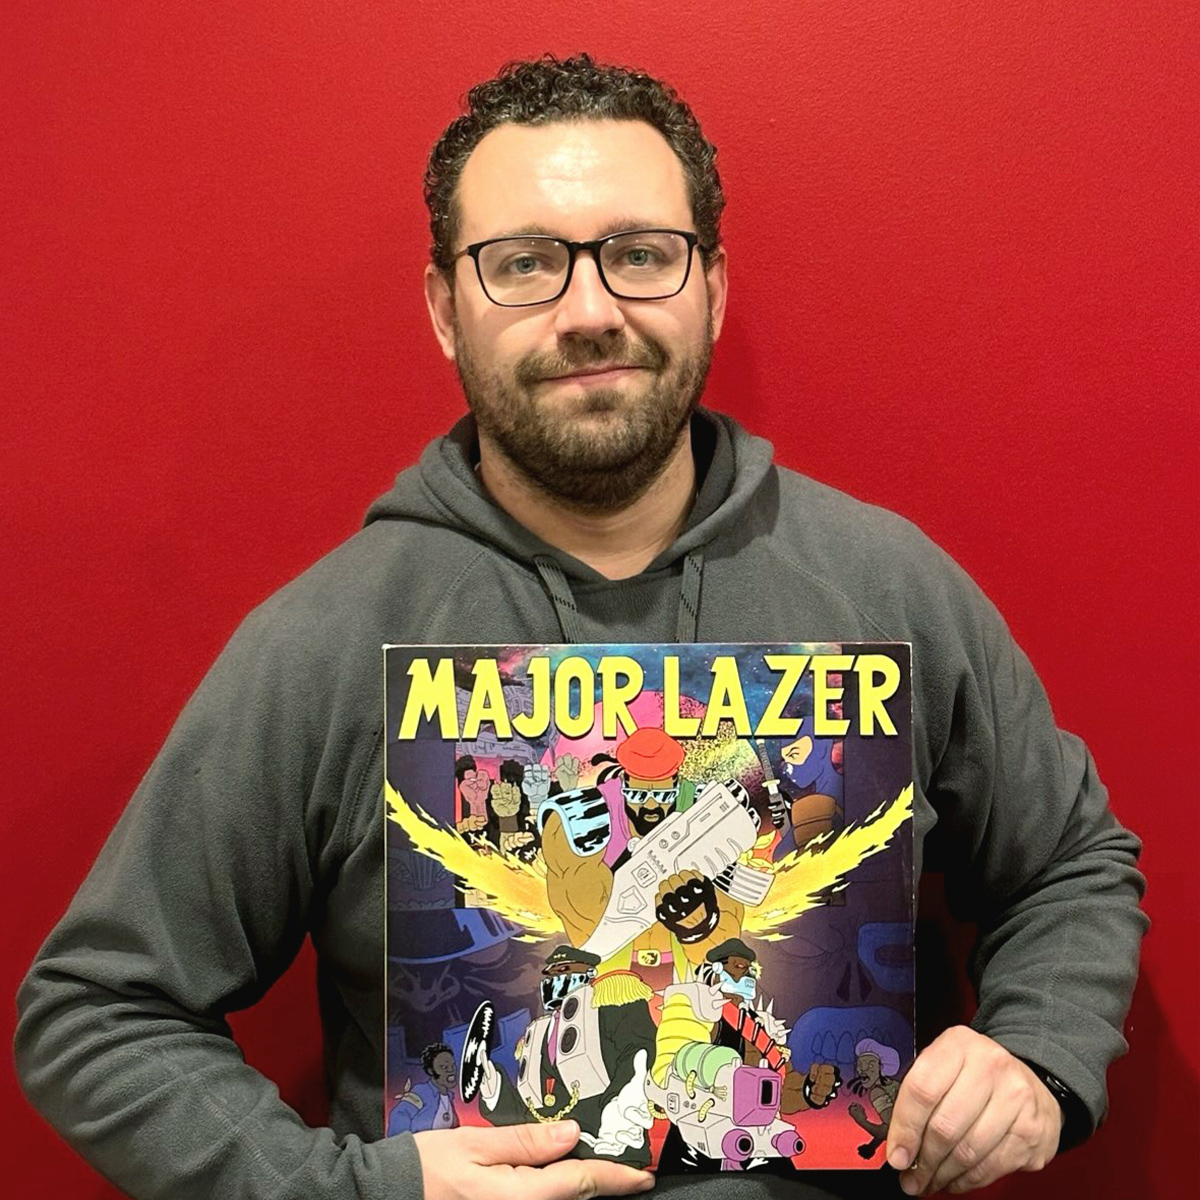 Derek's ultimate favorite album is Major Lazer's electrifying masterpiece! 🔥 From the hypnotic beats to the contagious energy, Major Lazer's music is pure fire.
#StaffPicks #MyFluance #RSD2024 #RESPECTTHERECORD